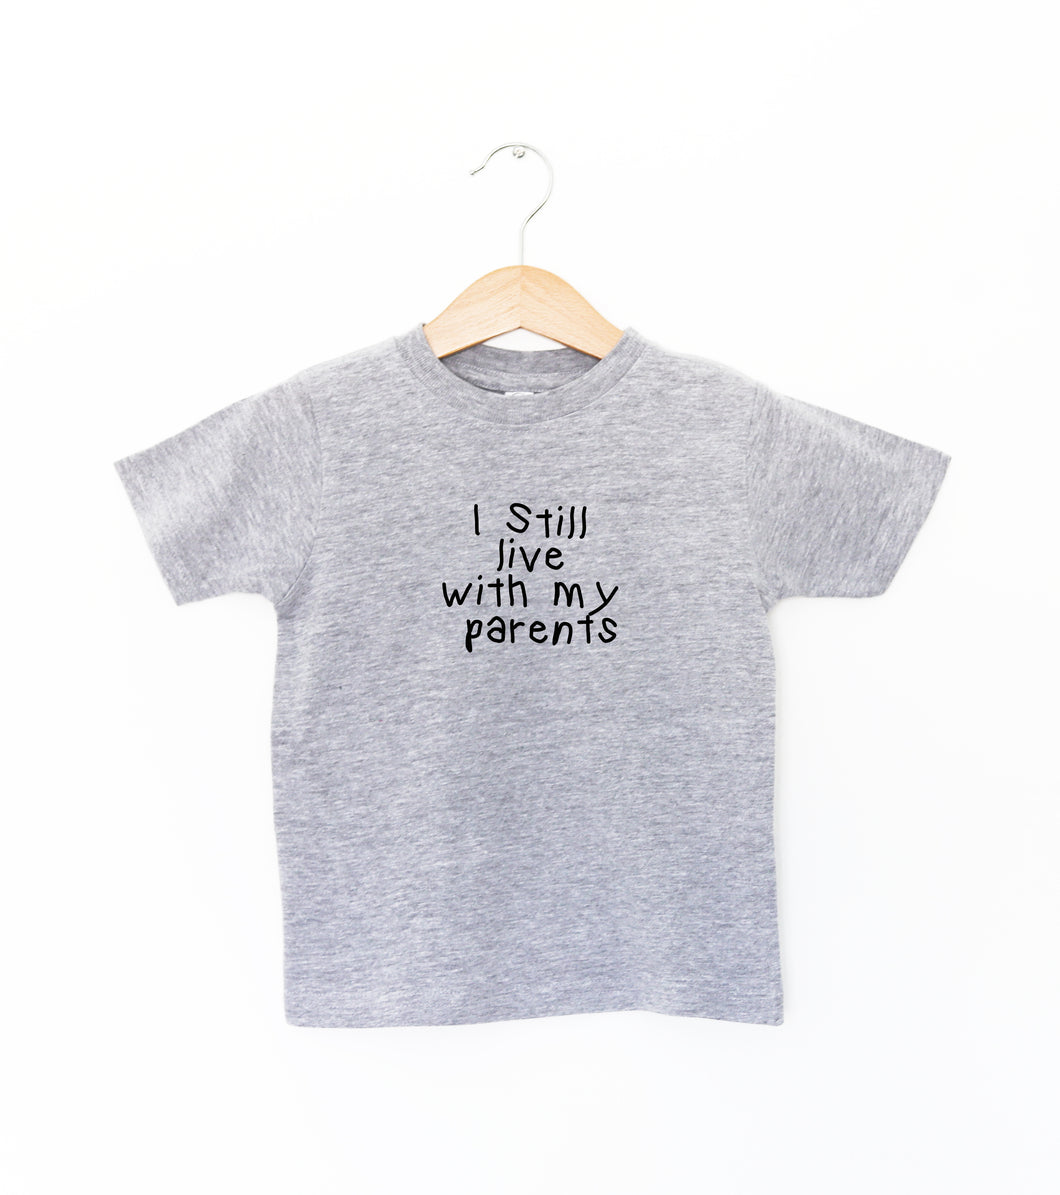 I STILL LIVE WITH MY PARENTS - TODDLER SHIRT